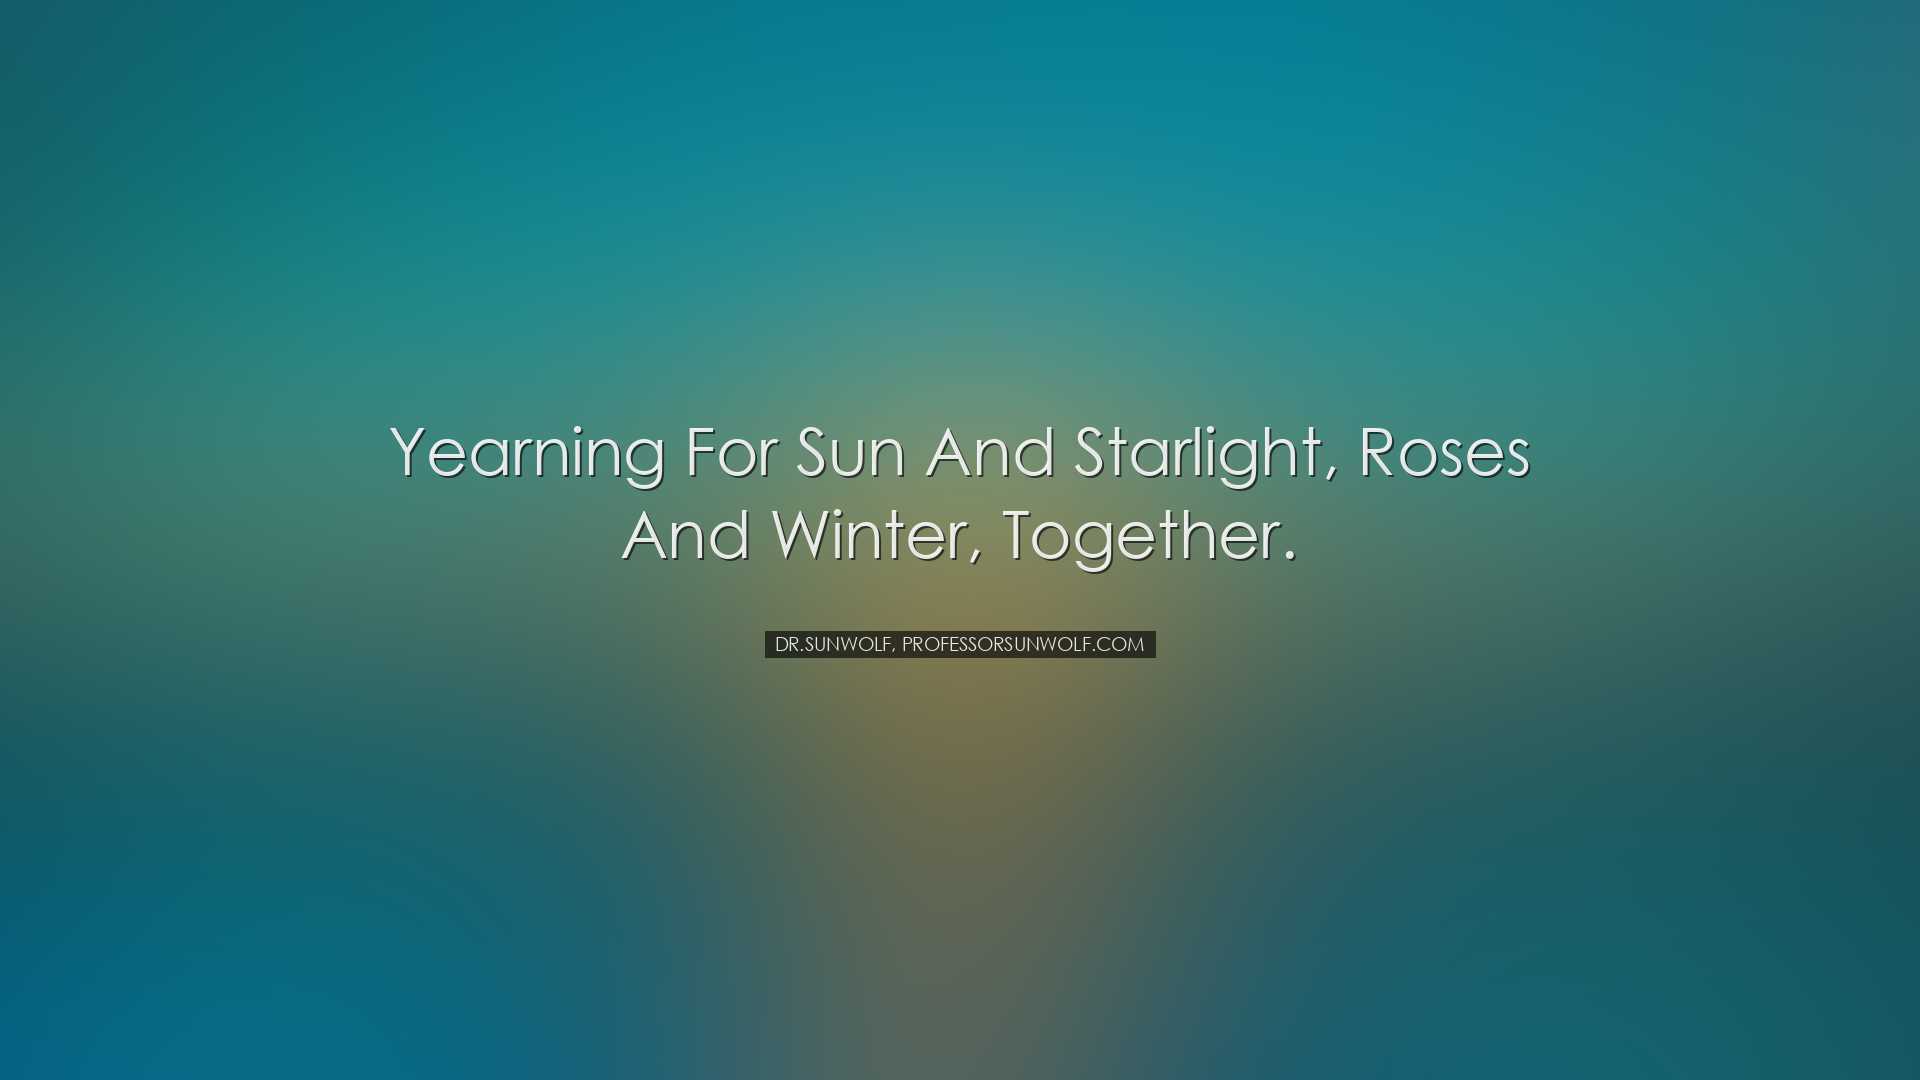 Yearning for sun and starlight, roses and winter, together. - Dr.S